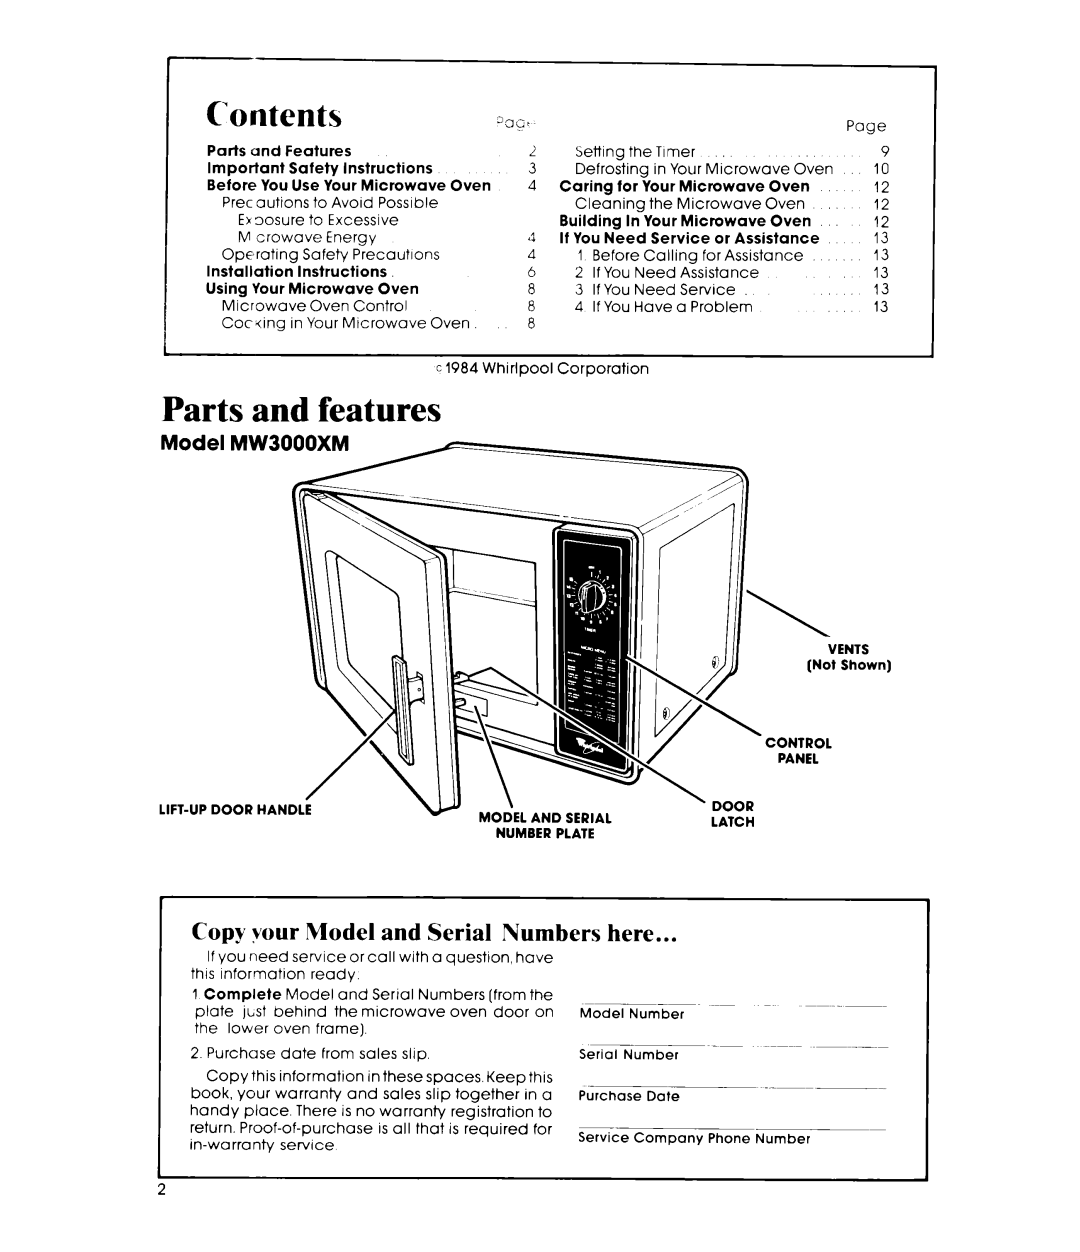 Whirlpool MW3000XM manual Parts and features, Copy your Model and Serial Numbers here, Model MW ‘3000XM A 